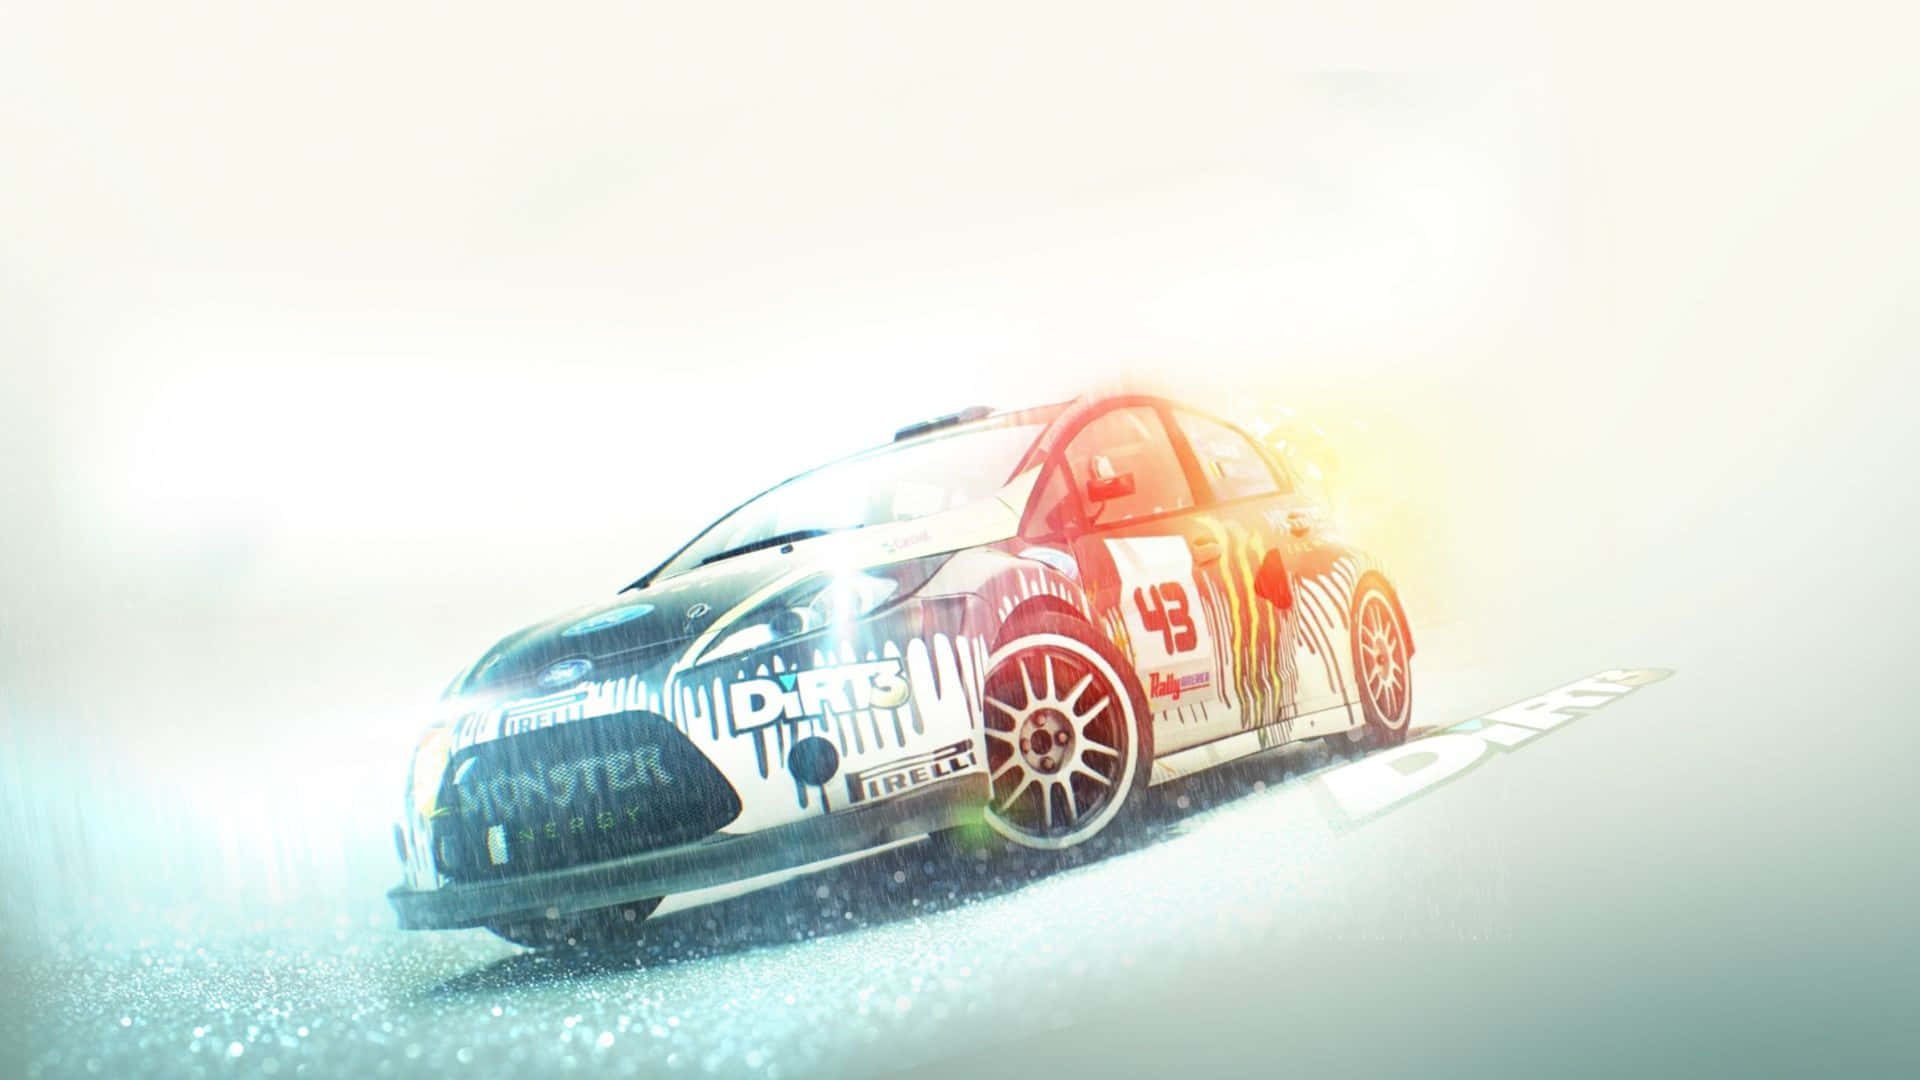 Powered by the Toyota Corolla, the Dirt 3 4k race features an exciting, action-packed race.